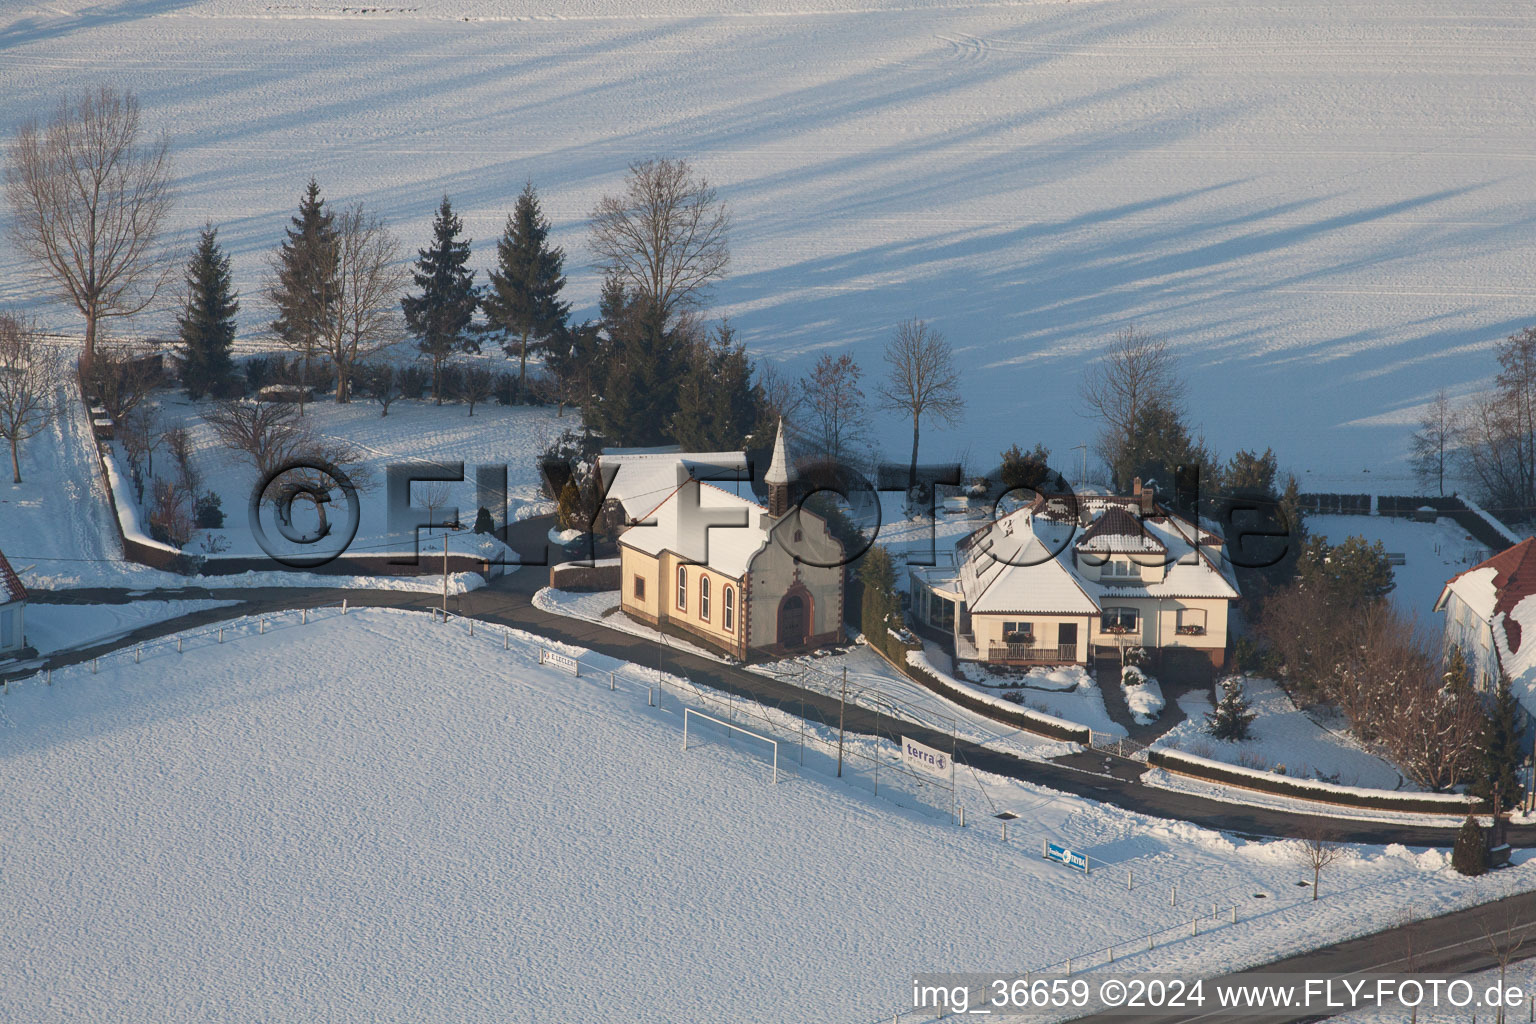 Bird's eye view of In winter when there is snow in Neewiller-près-Lauterbourg in the state Bas-Rhin, France